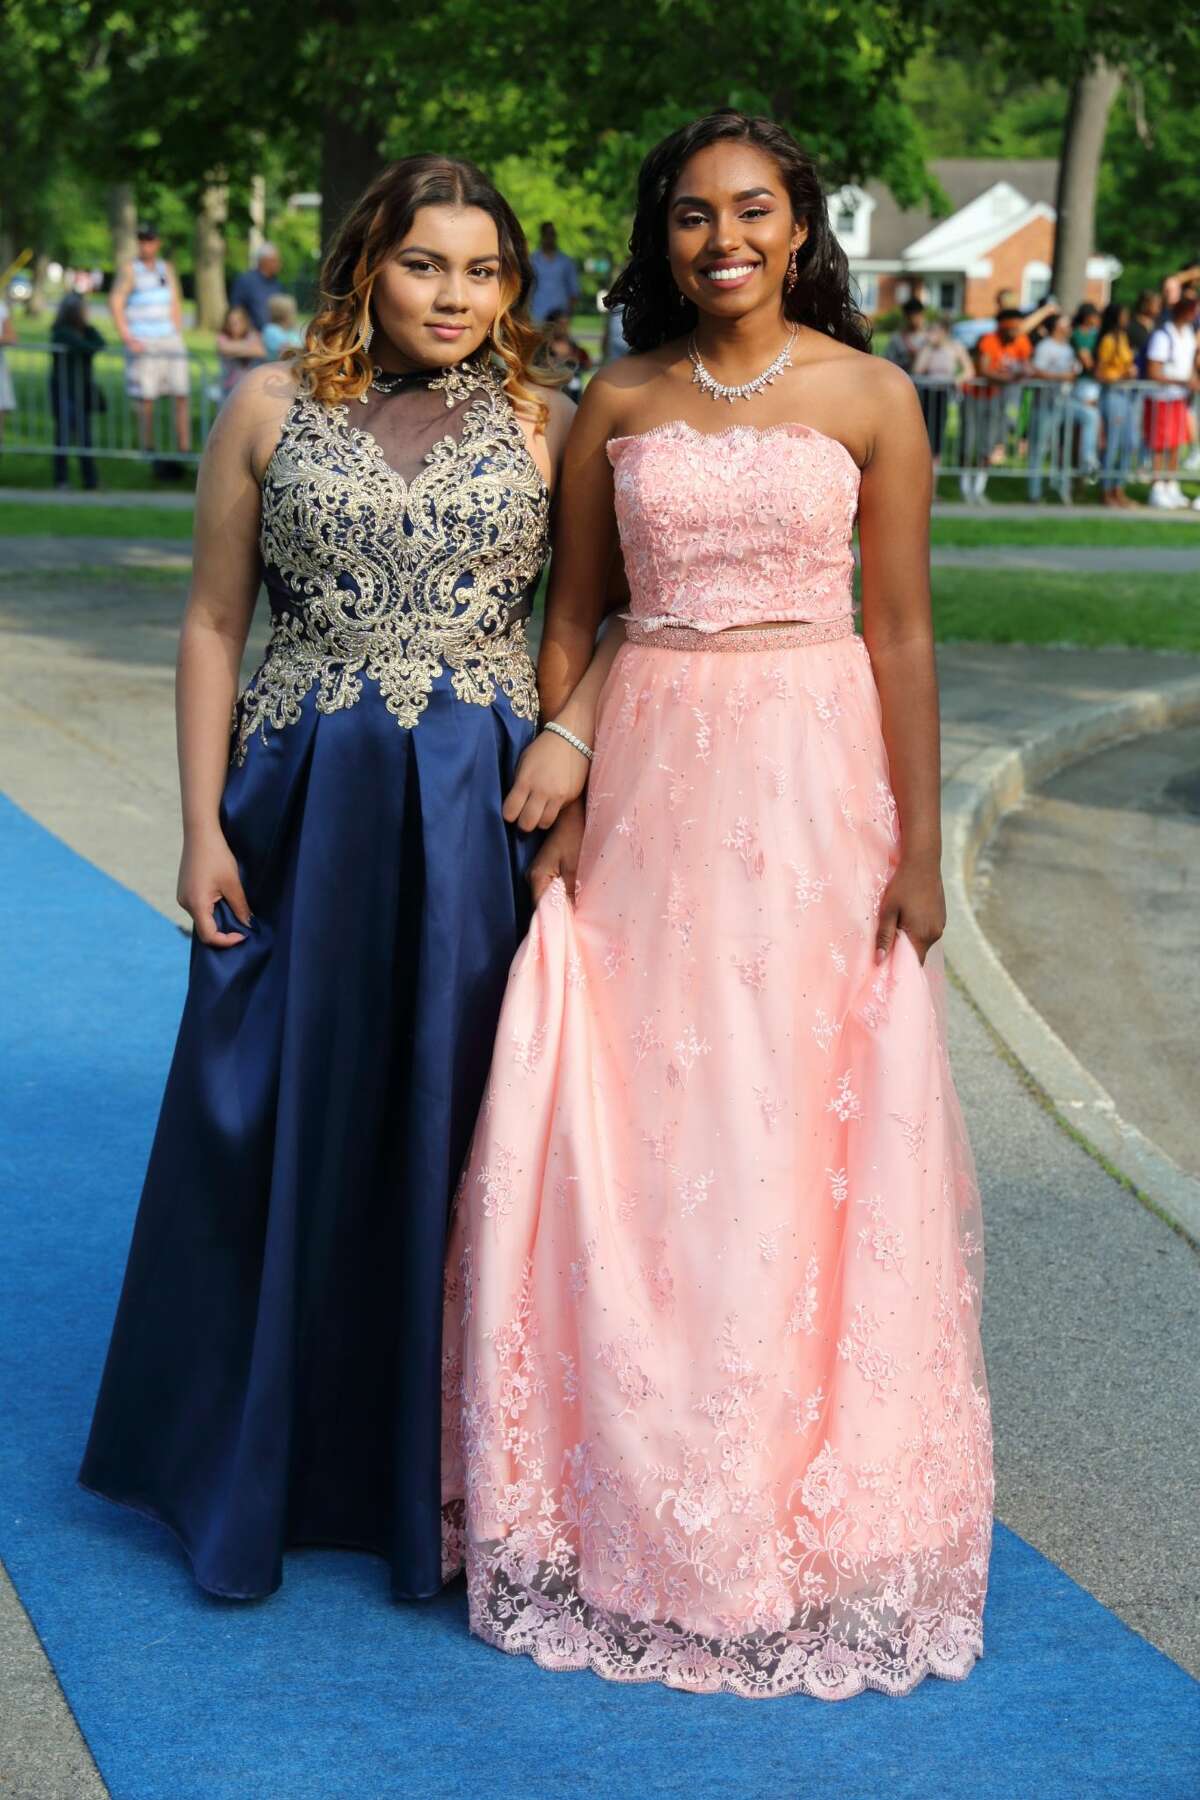 Were you Seen at the Schenectady High School Junior/Senior prom walk-in at the high school on Friday, June 8, 2018?